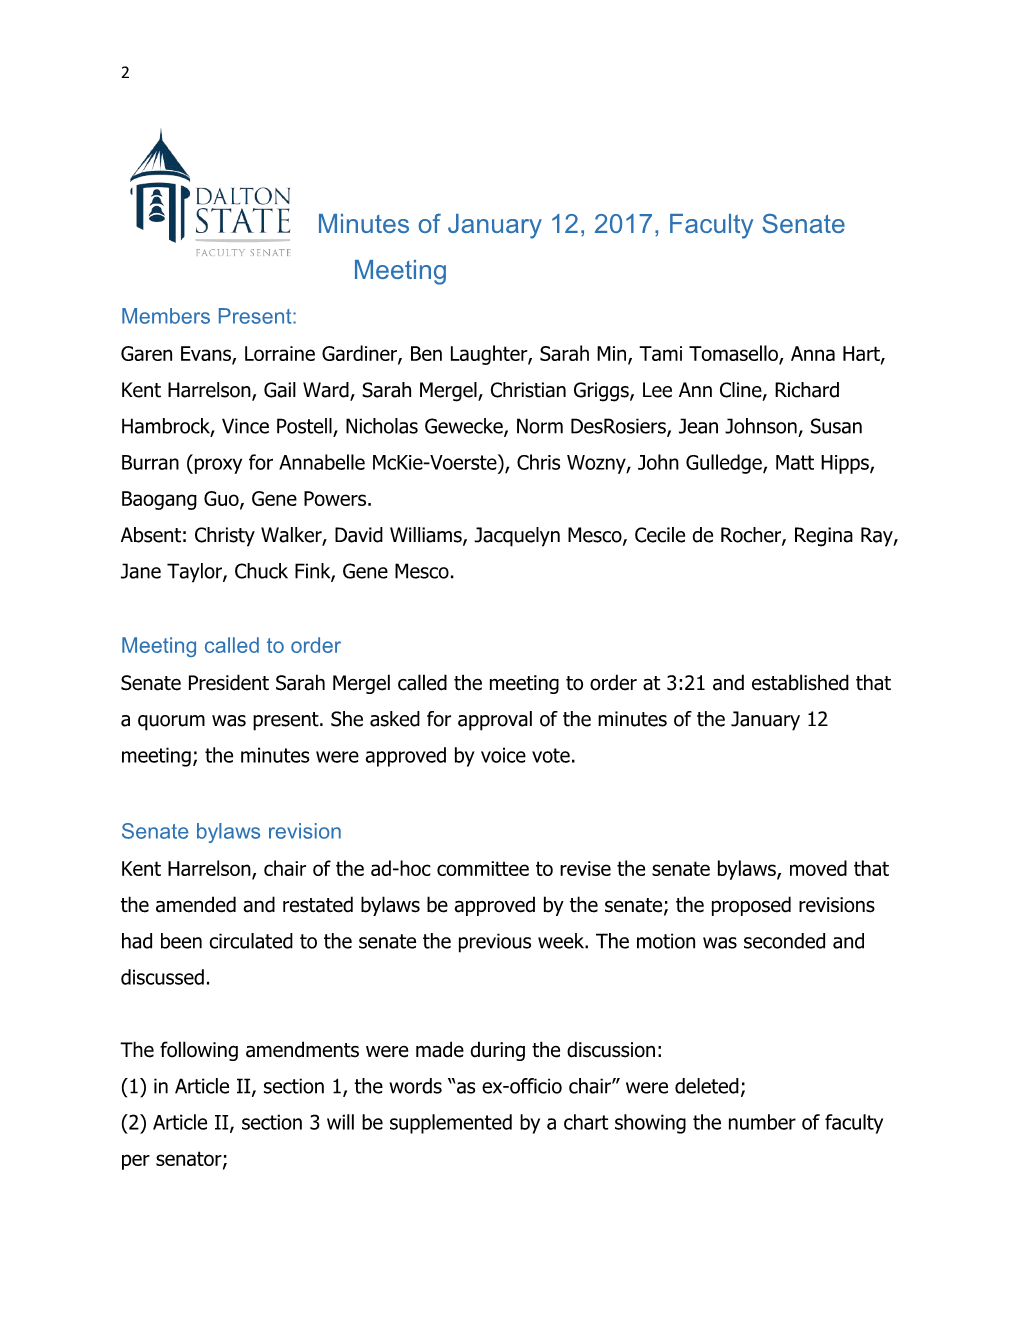 Minutes of January 12, 2017, Faculty Senate Meeting